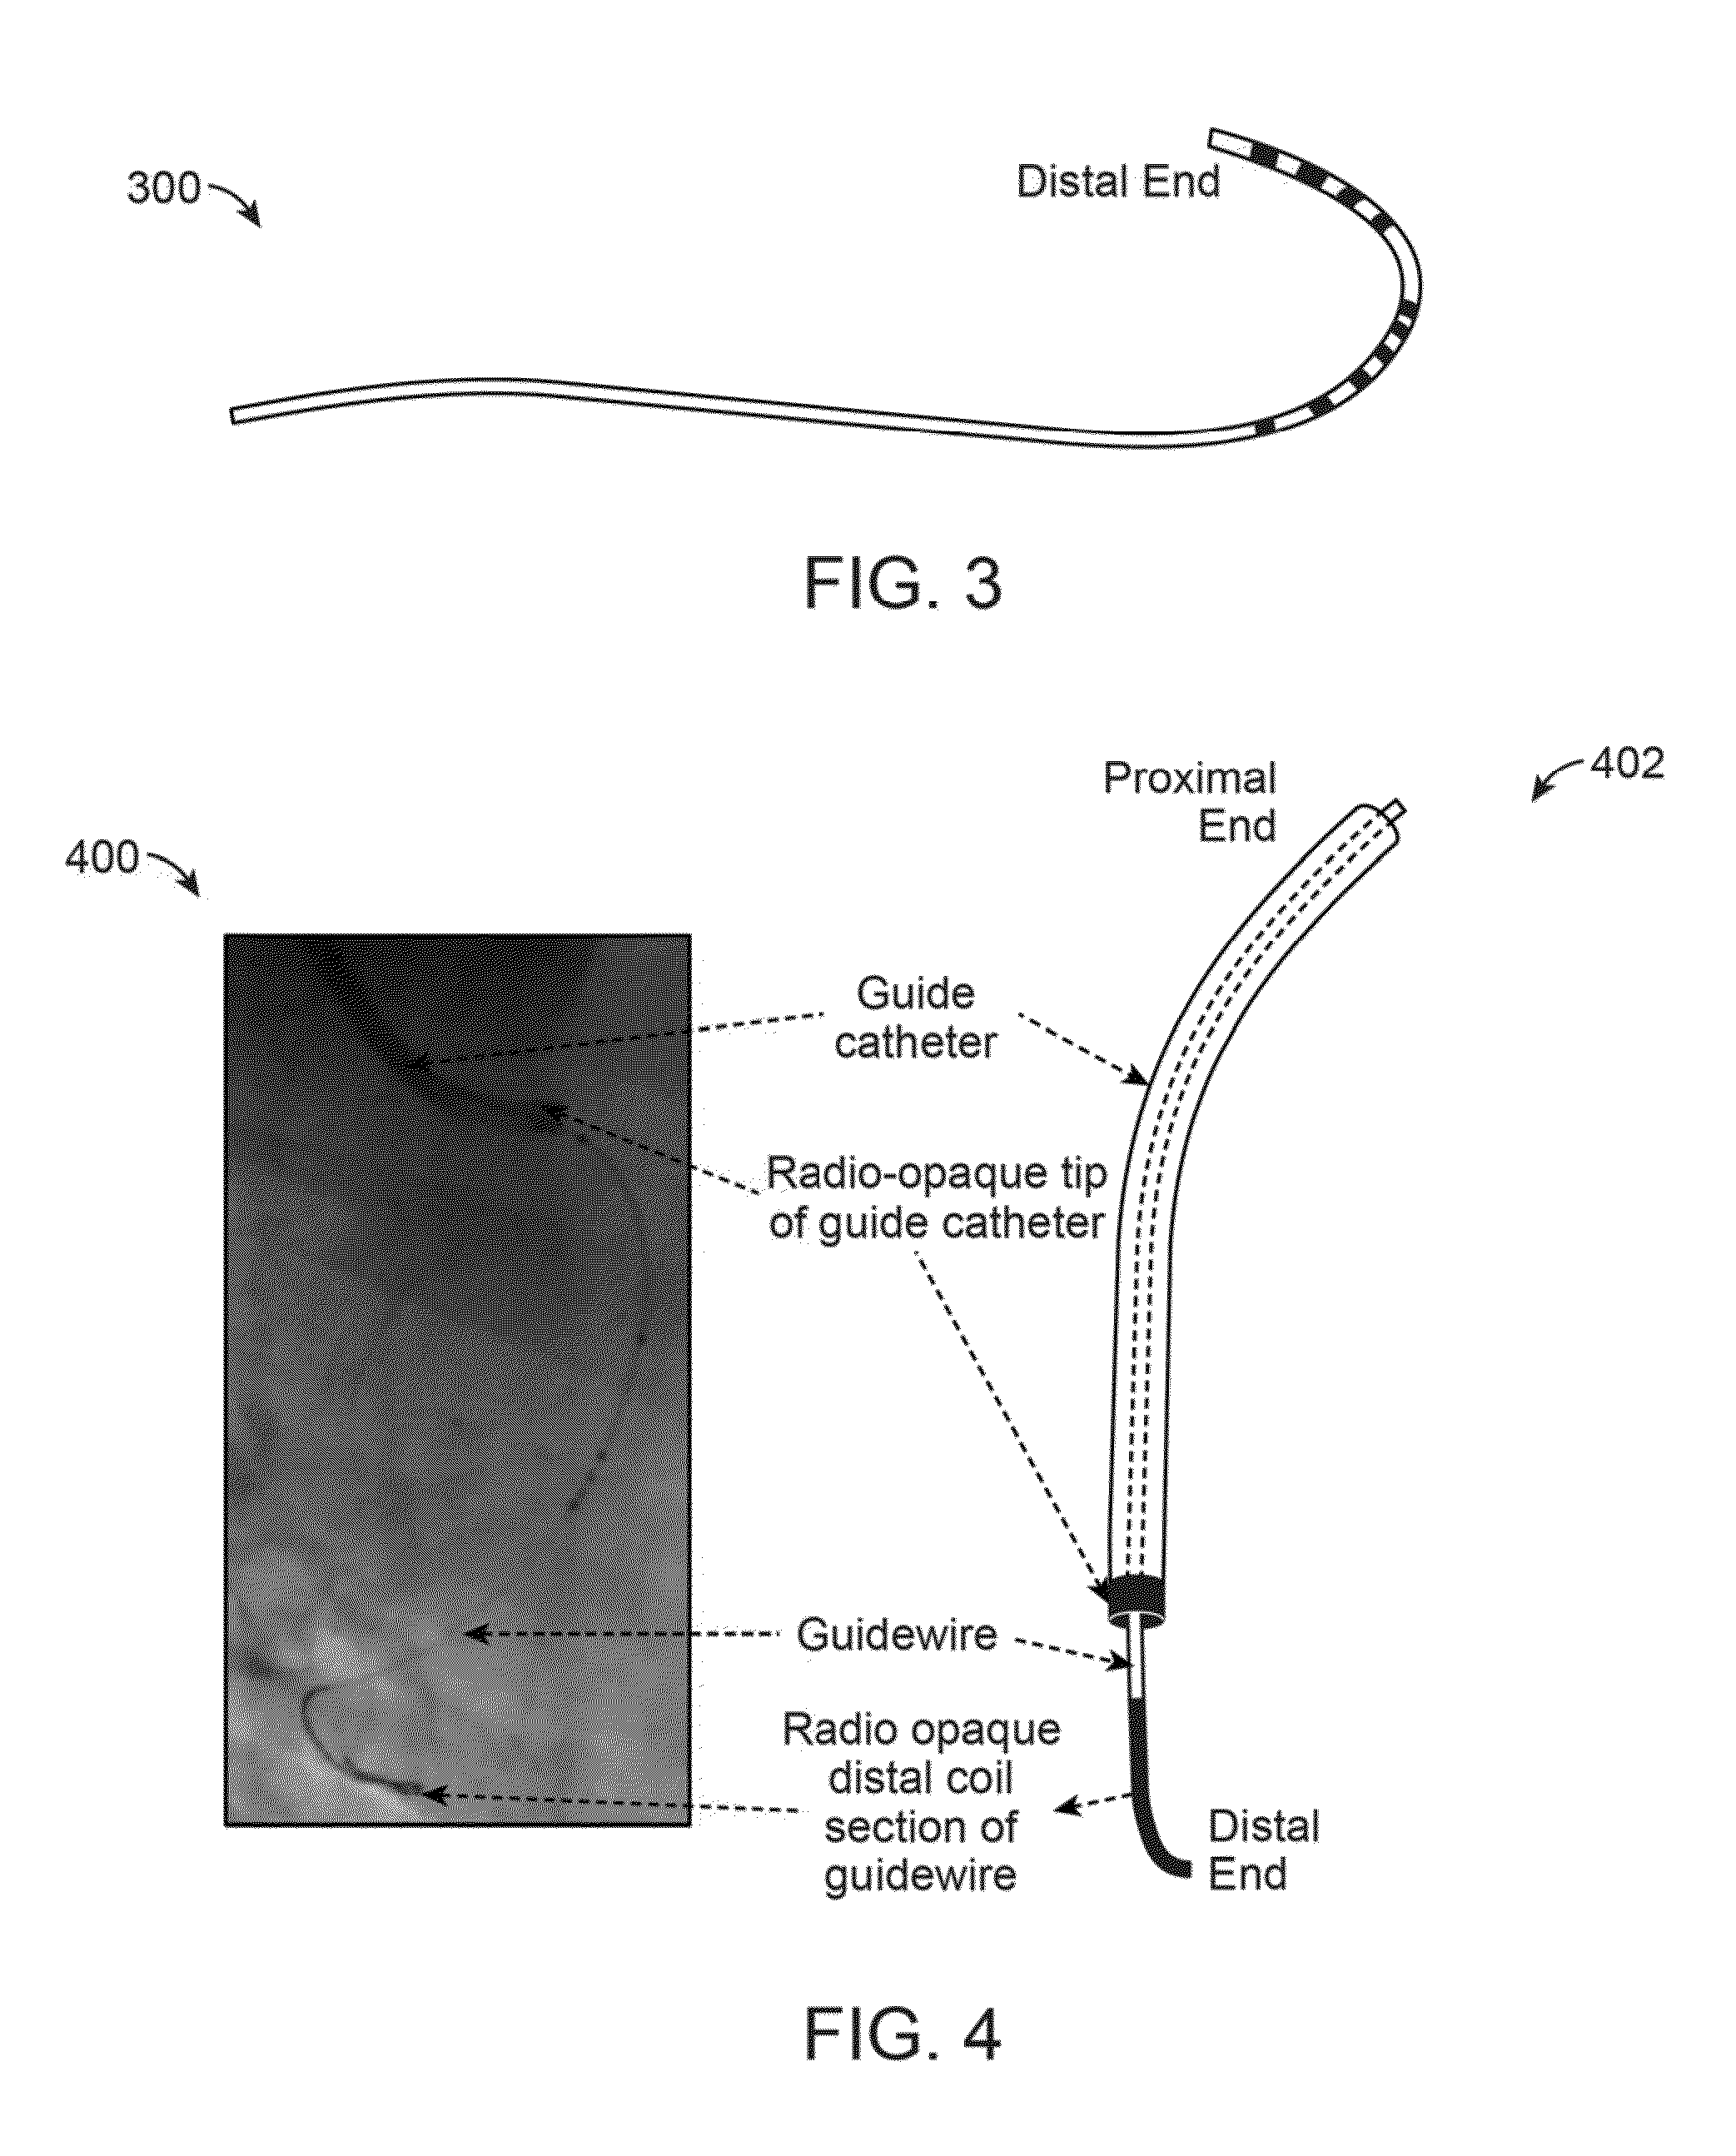 Systems for linear mapping of lumens